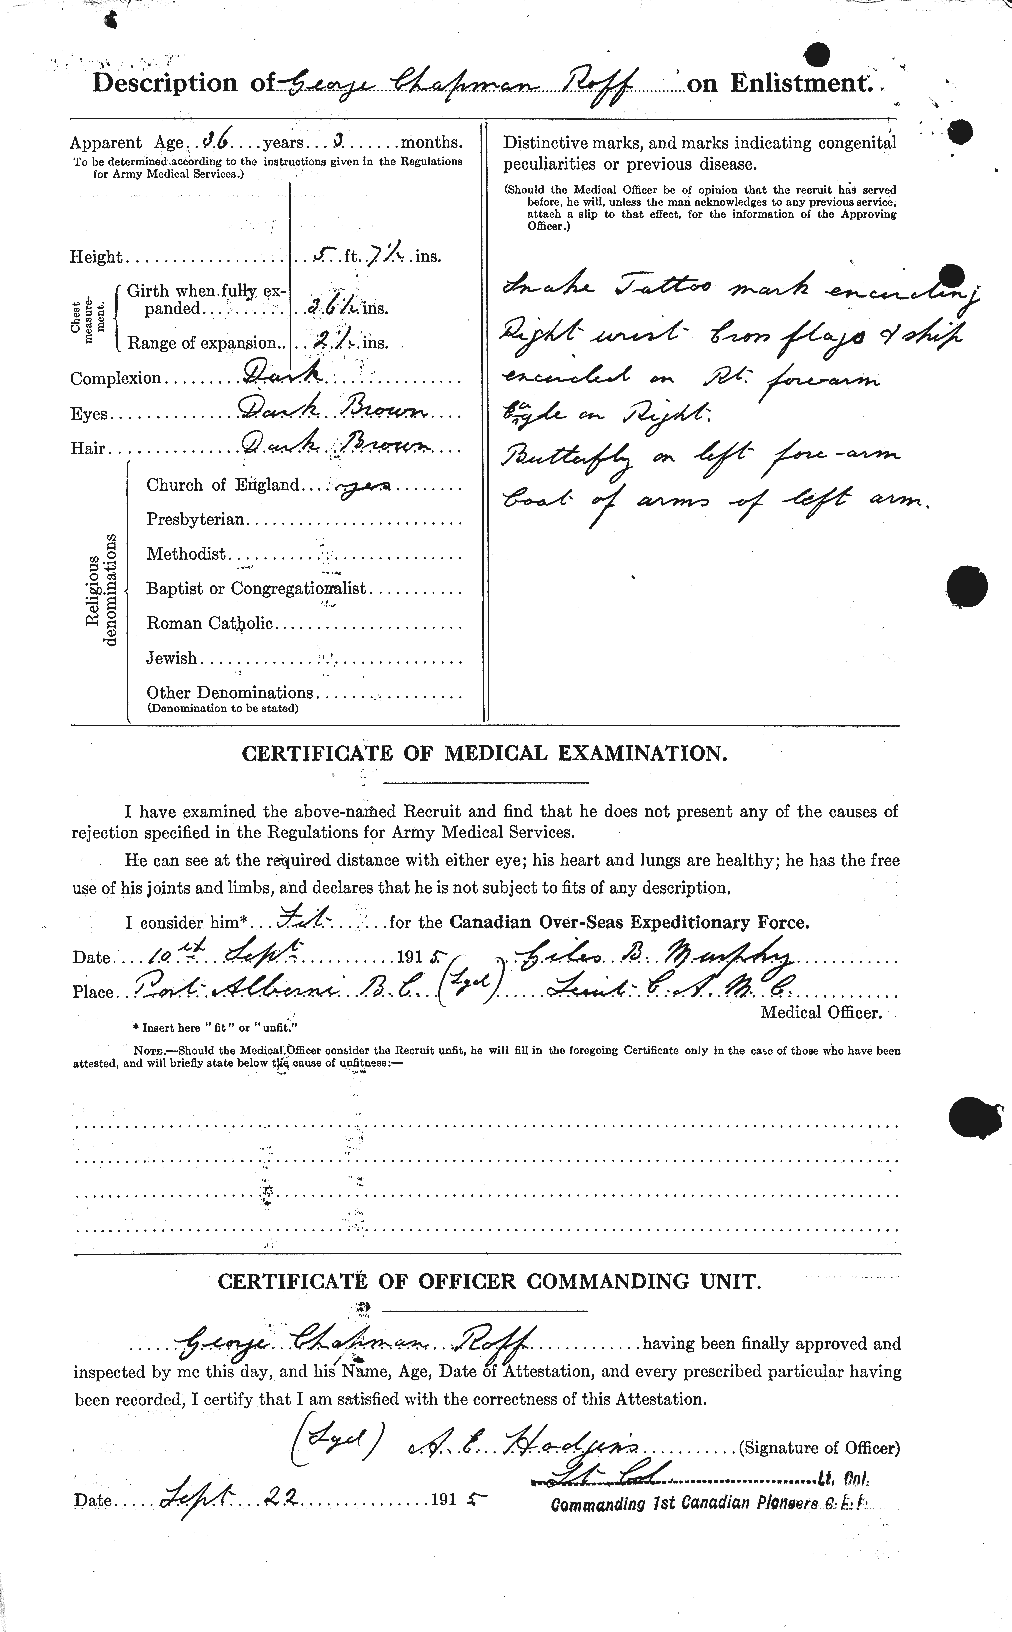 Personnel Records of the First World War - CEF 609524b